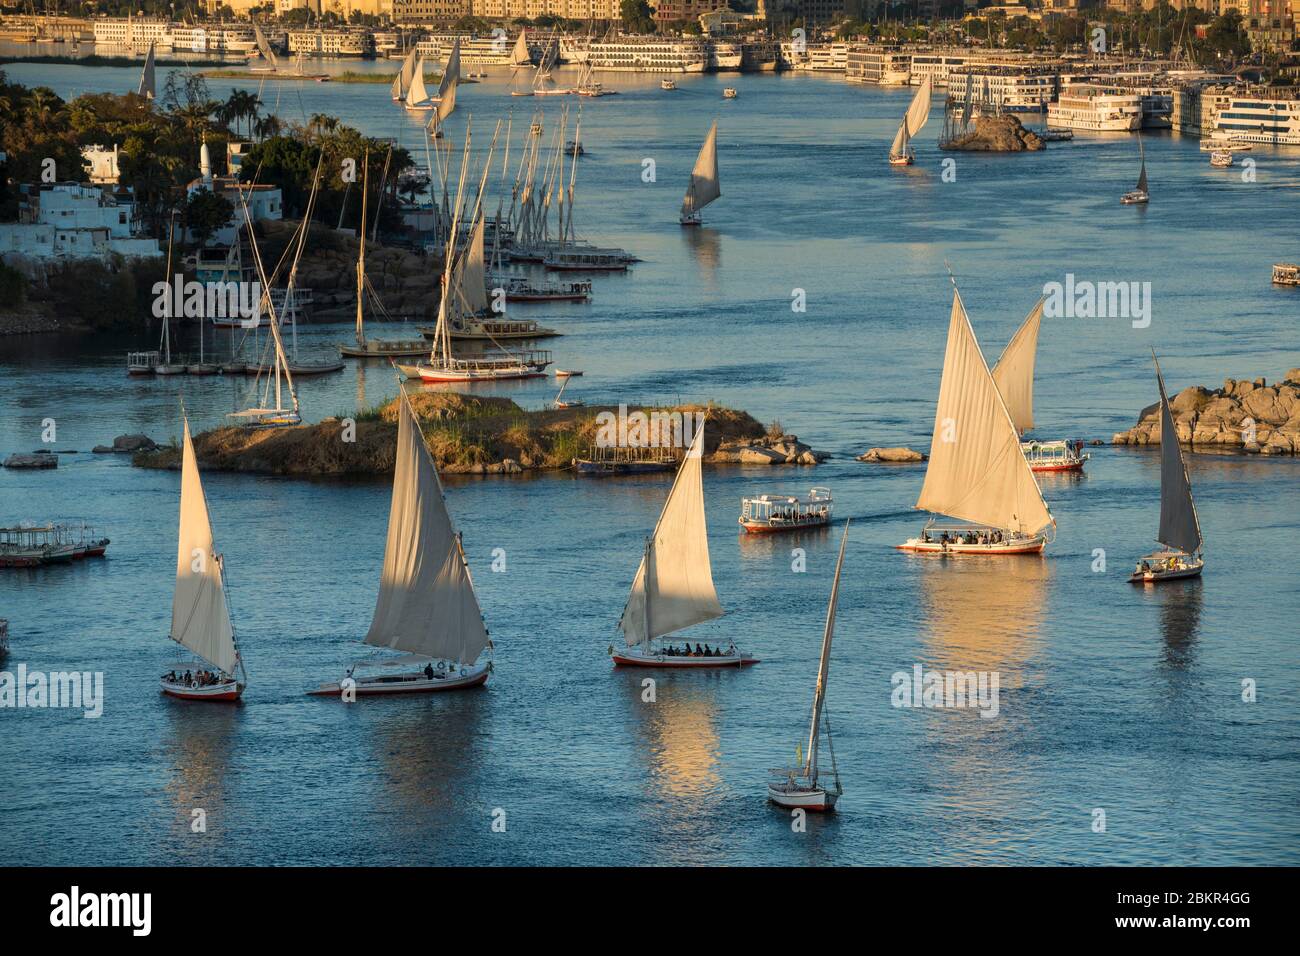 Egypt, Upper Egypt, Nile valley, Aswan, fellucas and touristic boats on the Nile Stock Photo